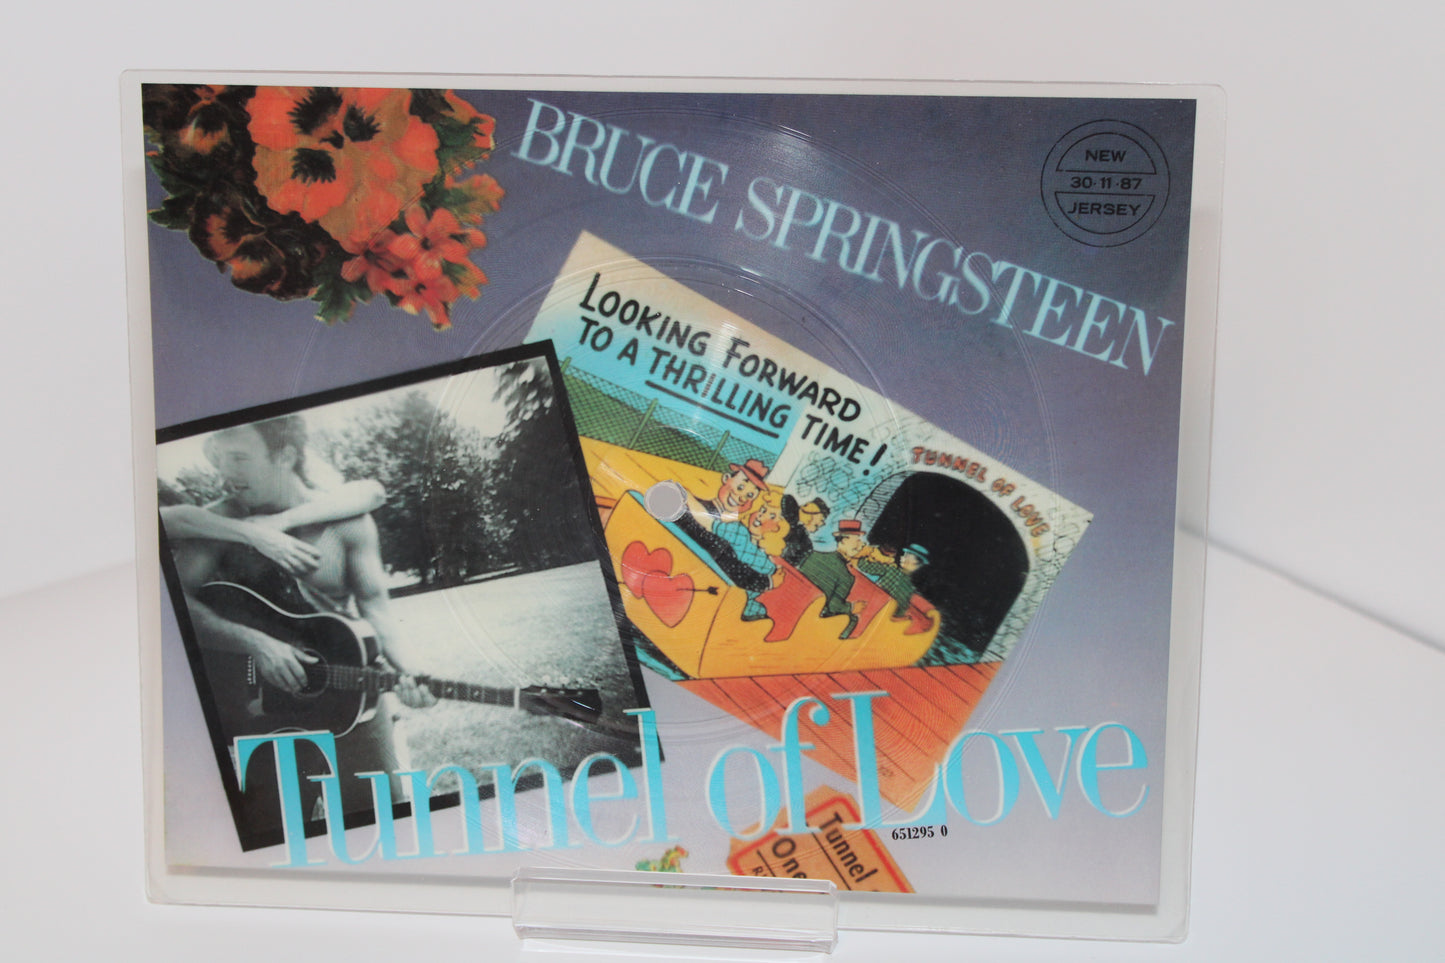 Bruce Springsteen - Tunnel of Love - Picture Disc 7" Vinyl - Ltd. Edition - Near Mint